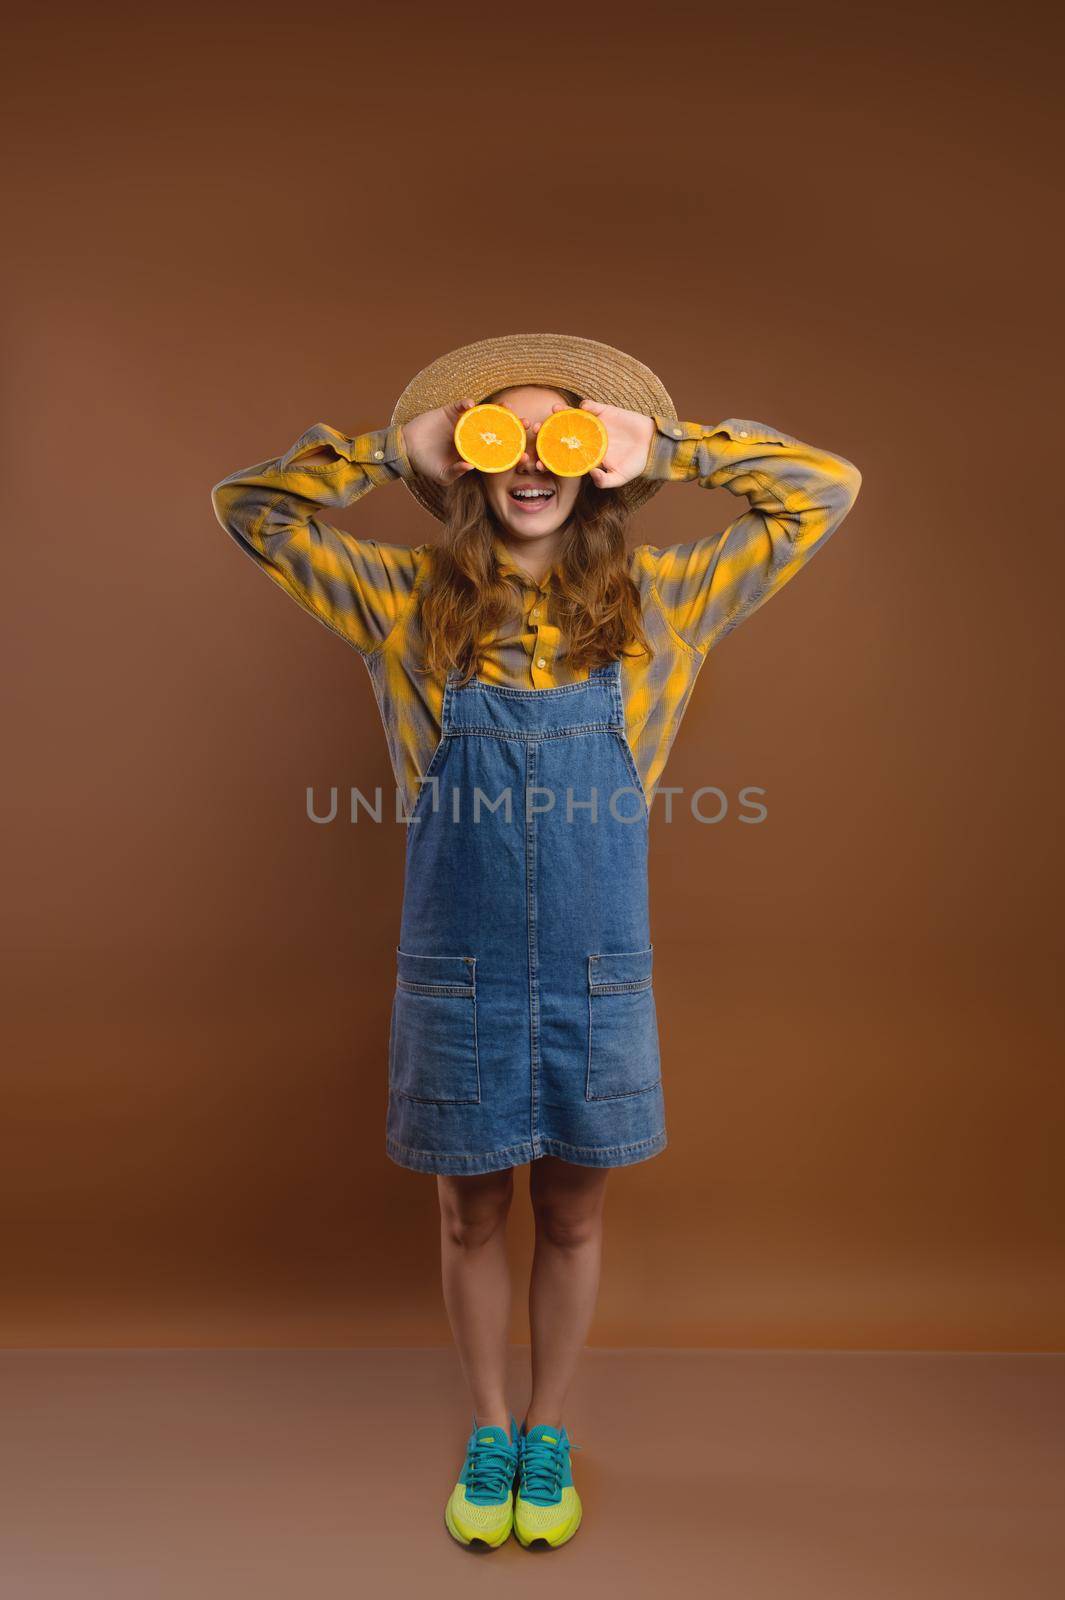 Studio portrait of a cheerful hipster woman going crazy making a funny face and covering her eyes with oranges by yanik88